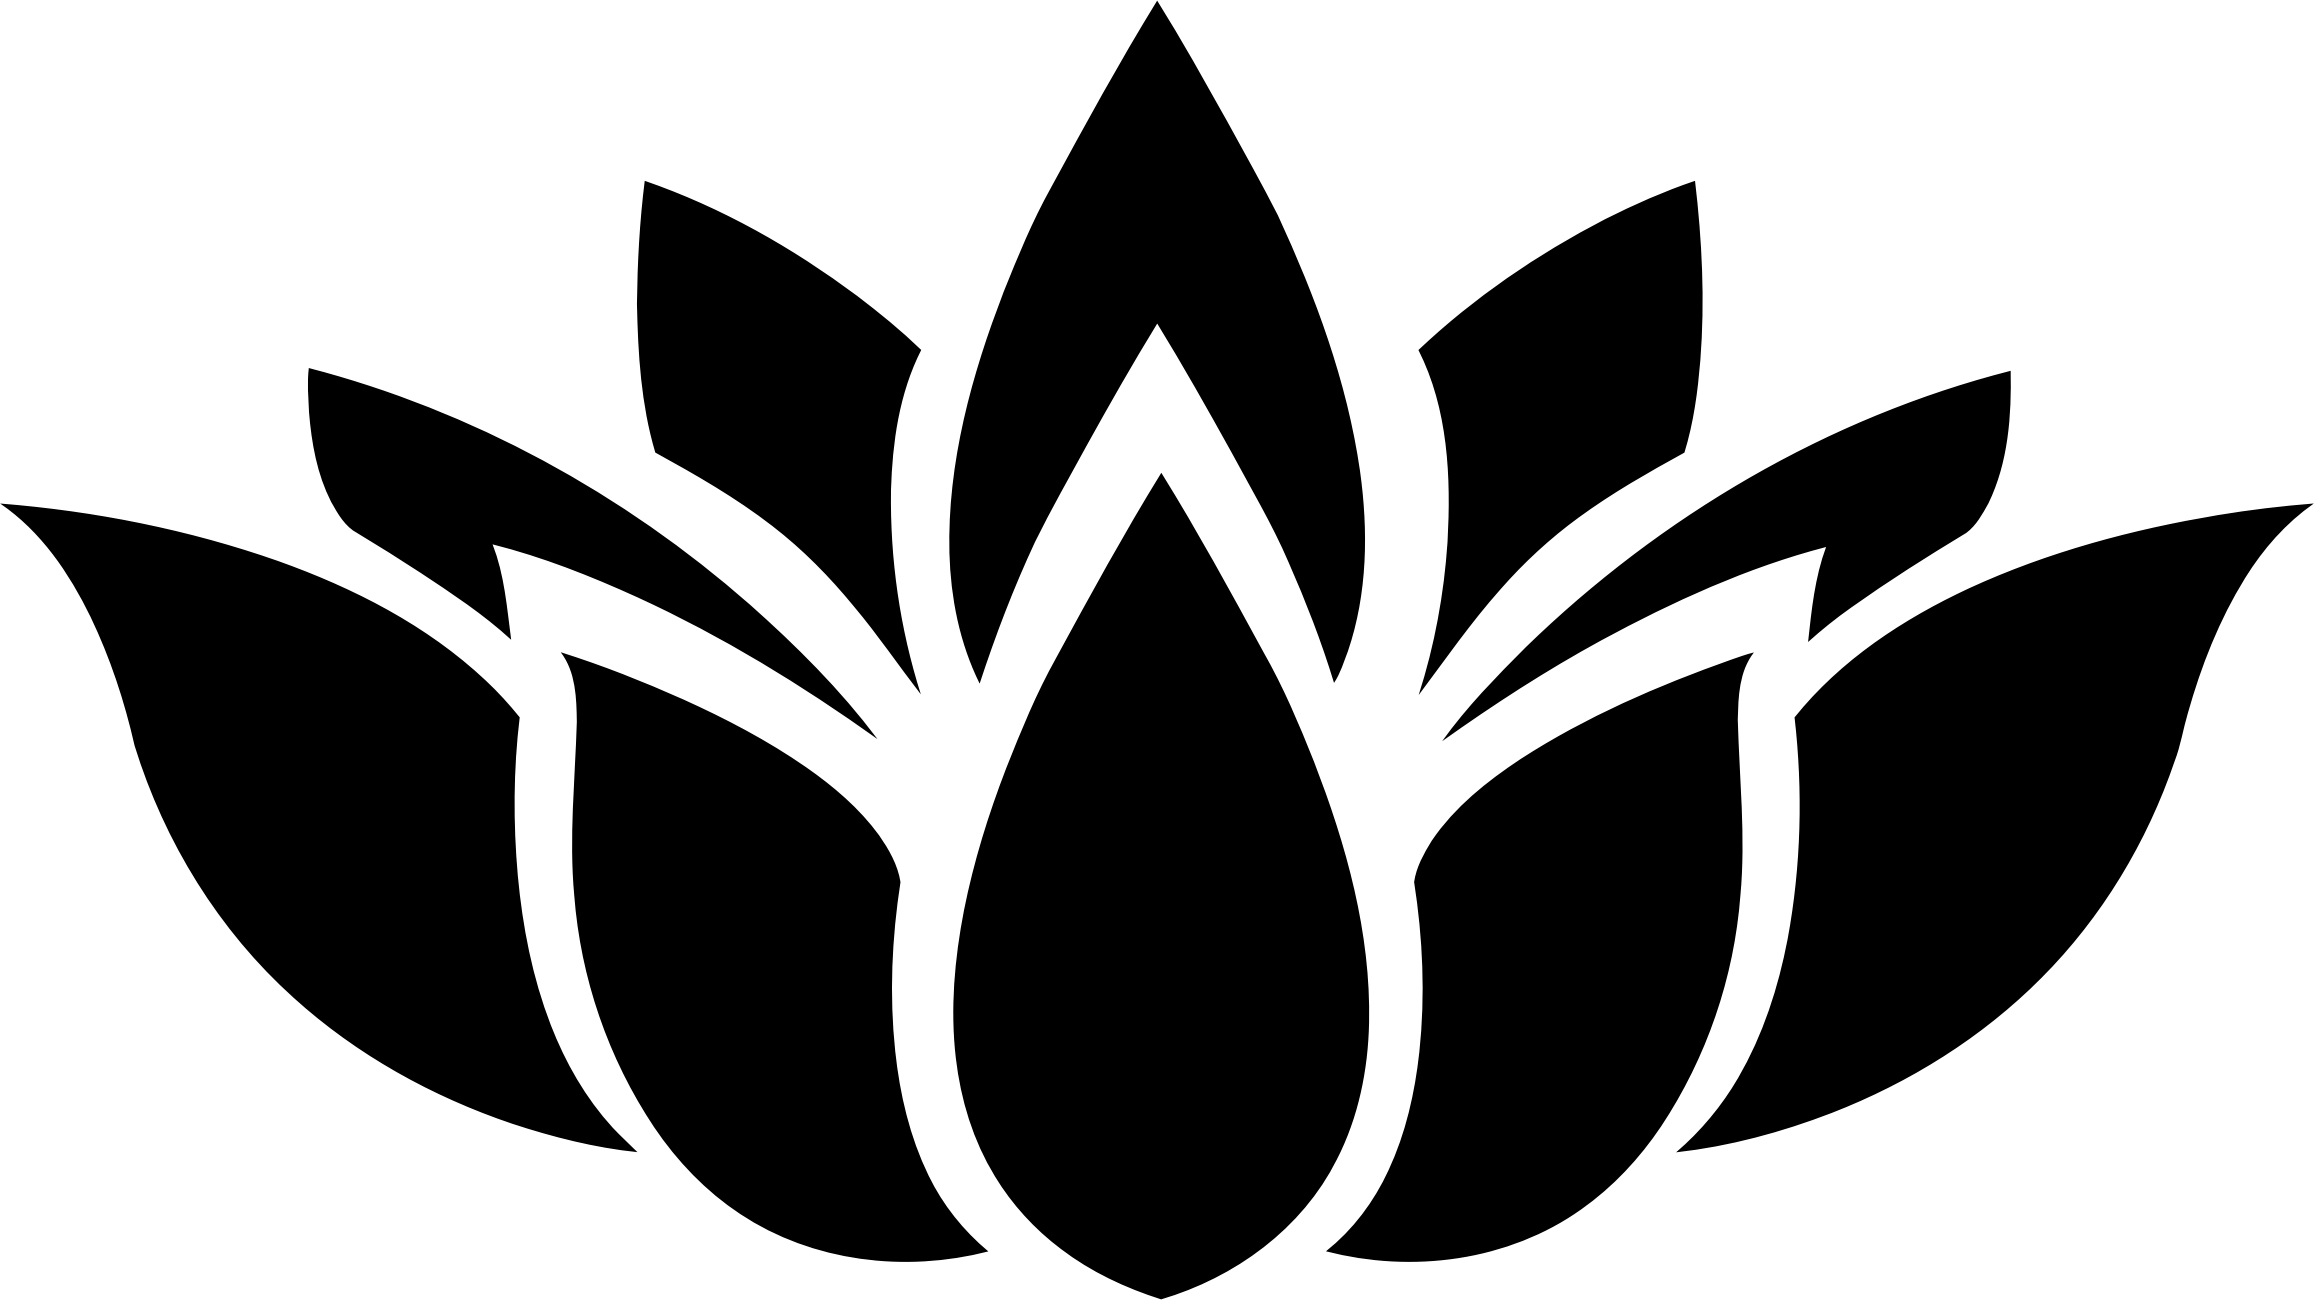 White Lotus Flower Logo - White lotus flower clipart royalty free stock - RR collections